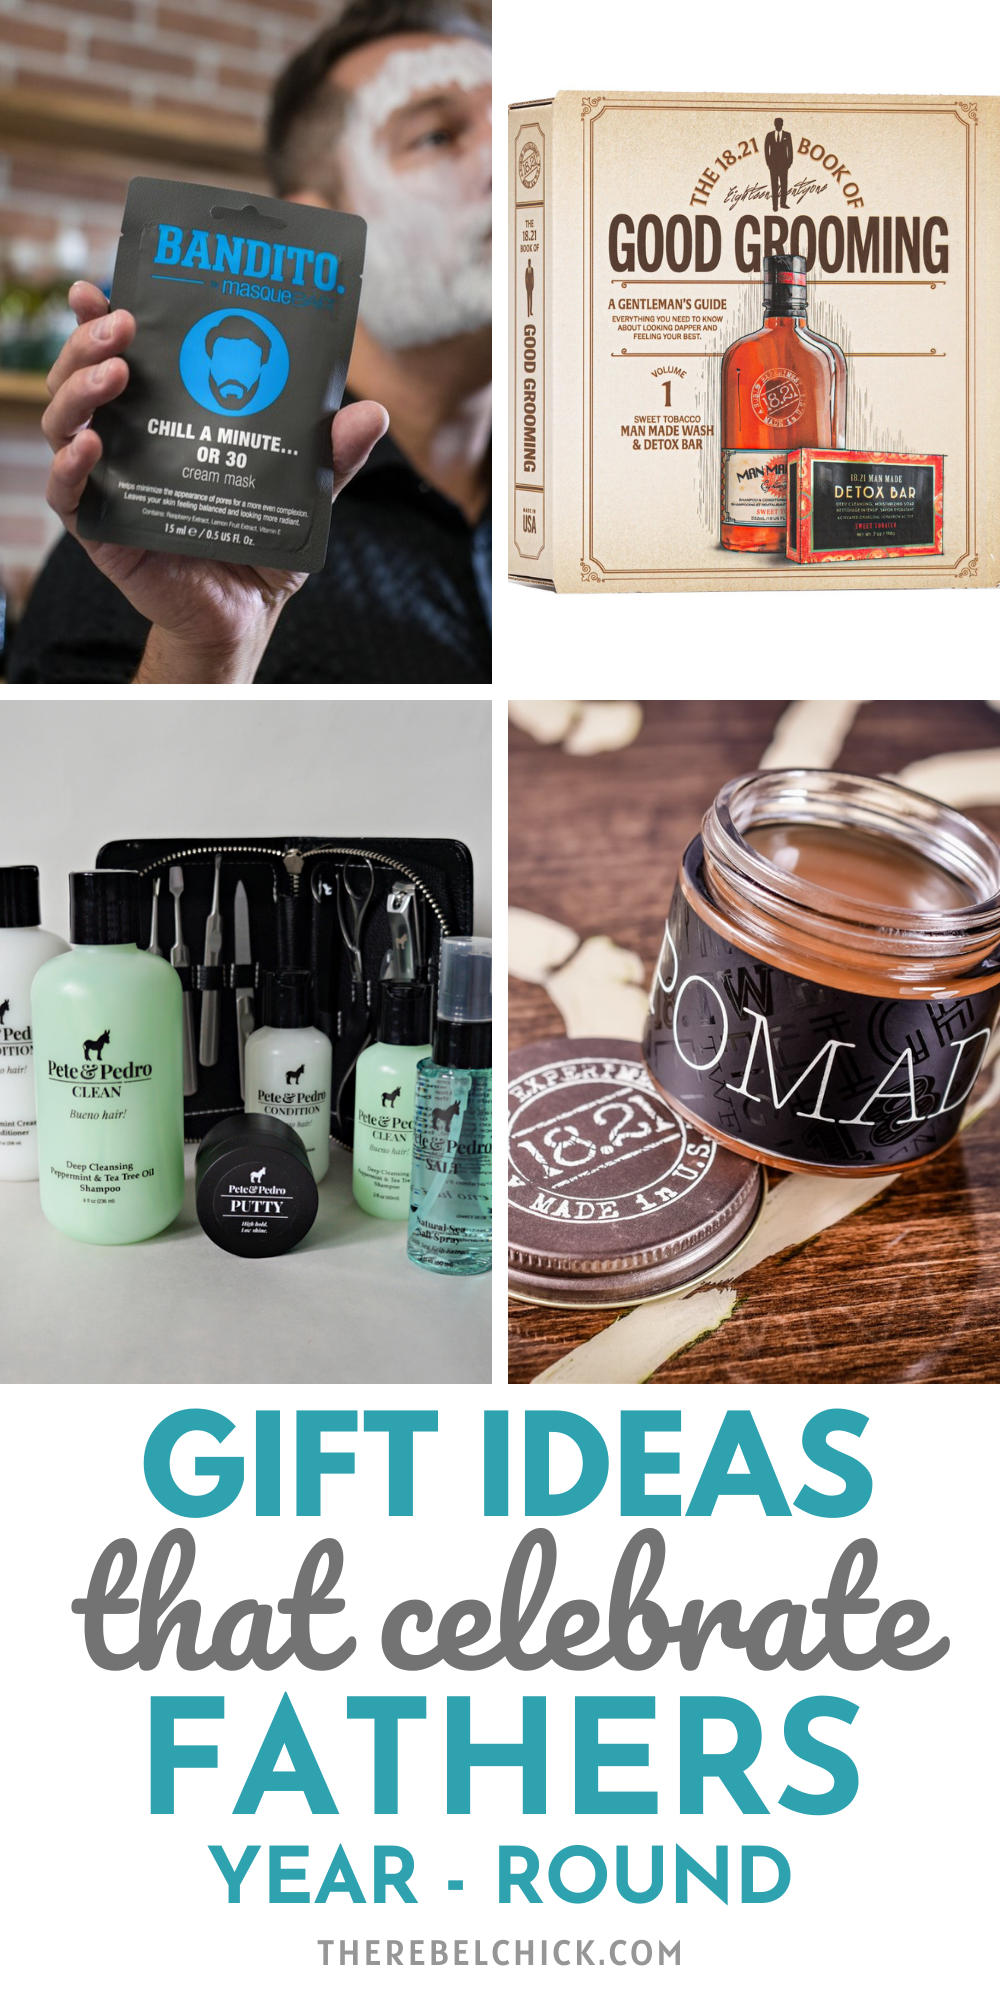 Gift Ideas That Celebrate Dads Year-Round